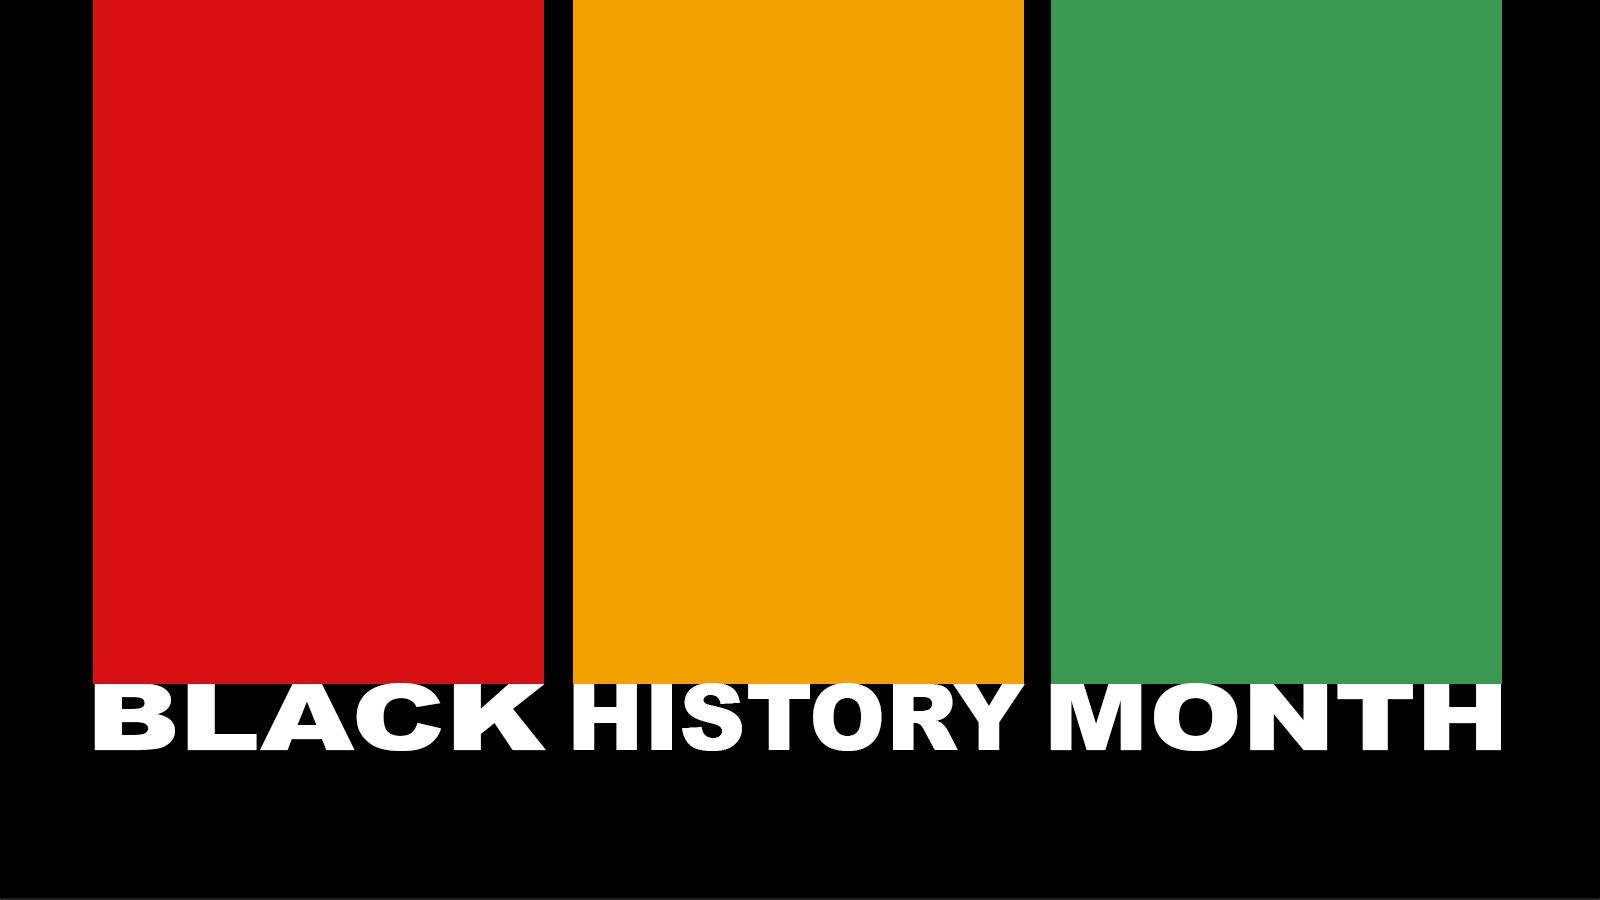 Black History Month text with red, orange, and green blocks above text